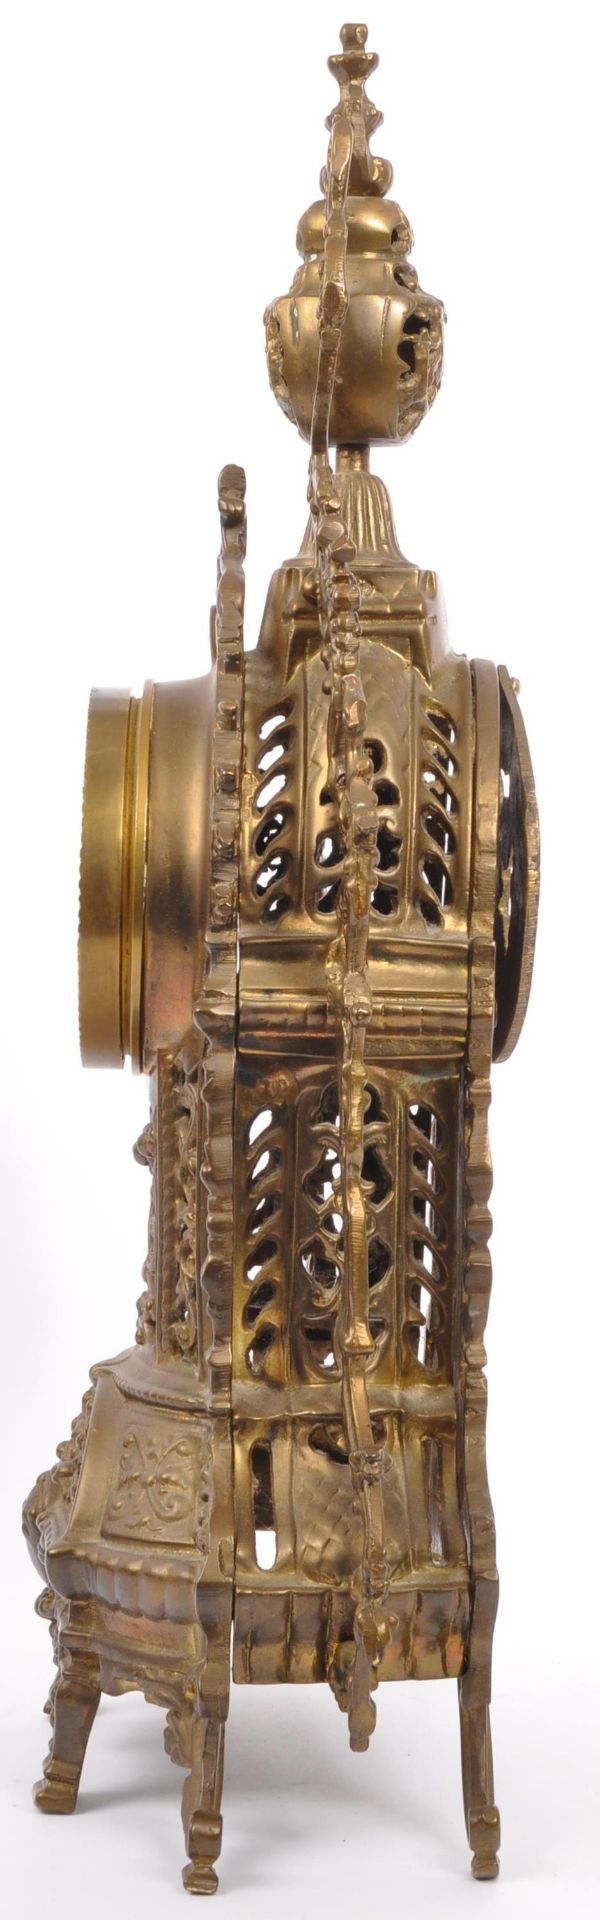 LARGE EARLY 20TH CENTURY ORNATE SCROLLED BRASS CLOCK BODY - Image 2 of 7